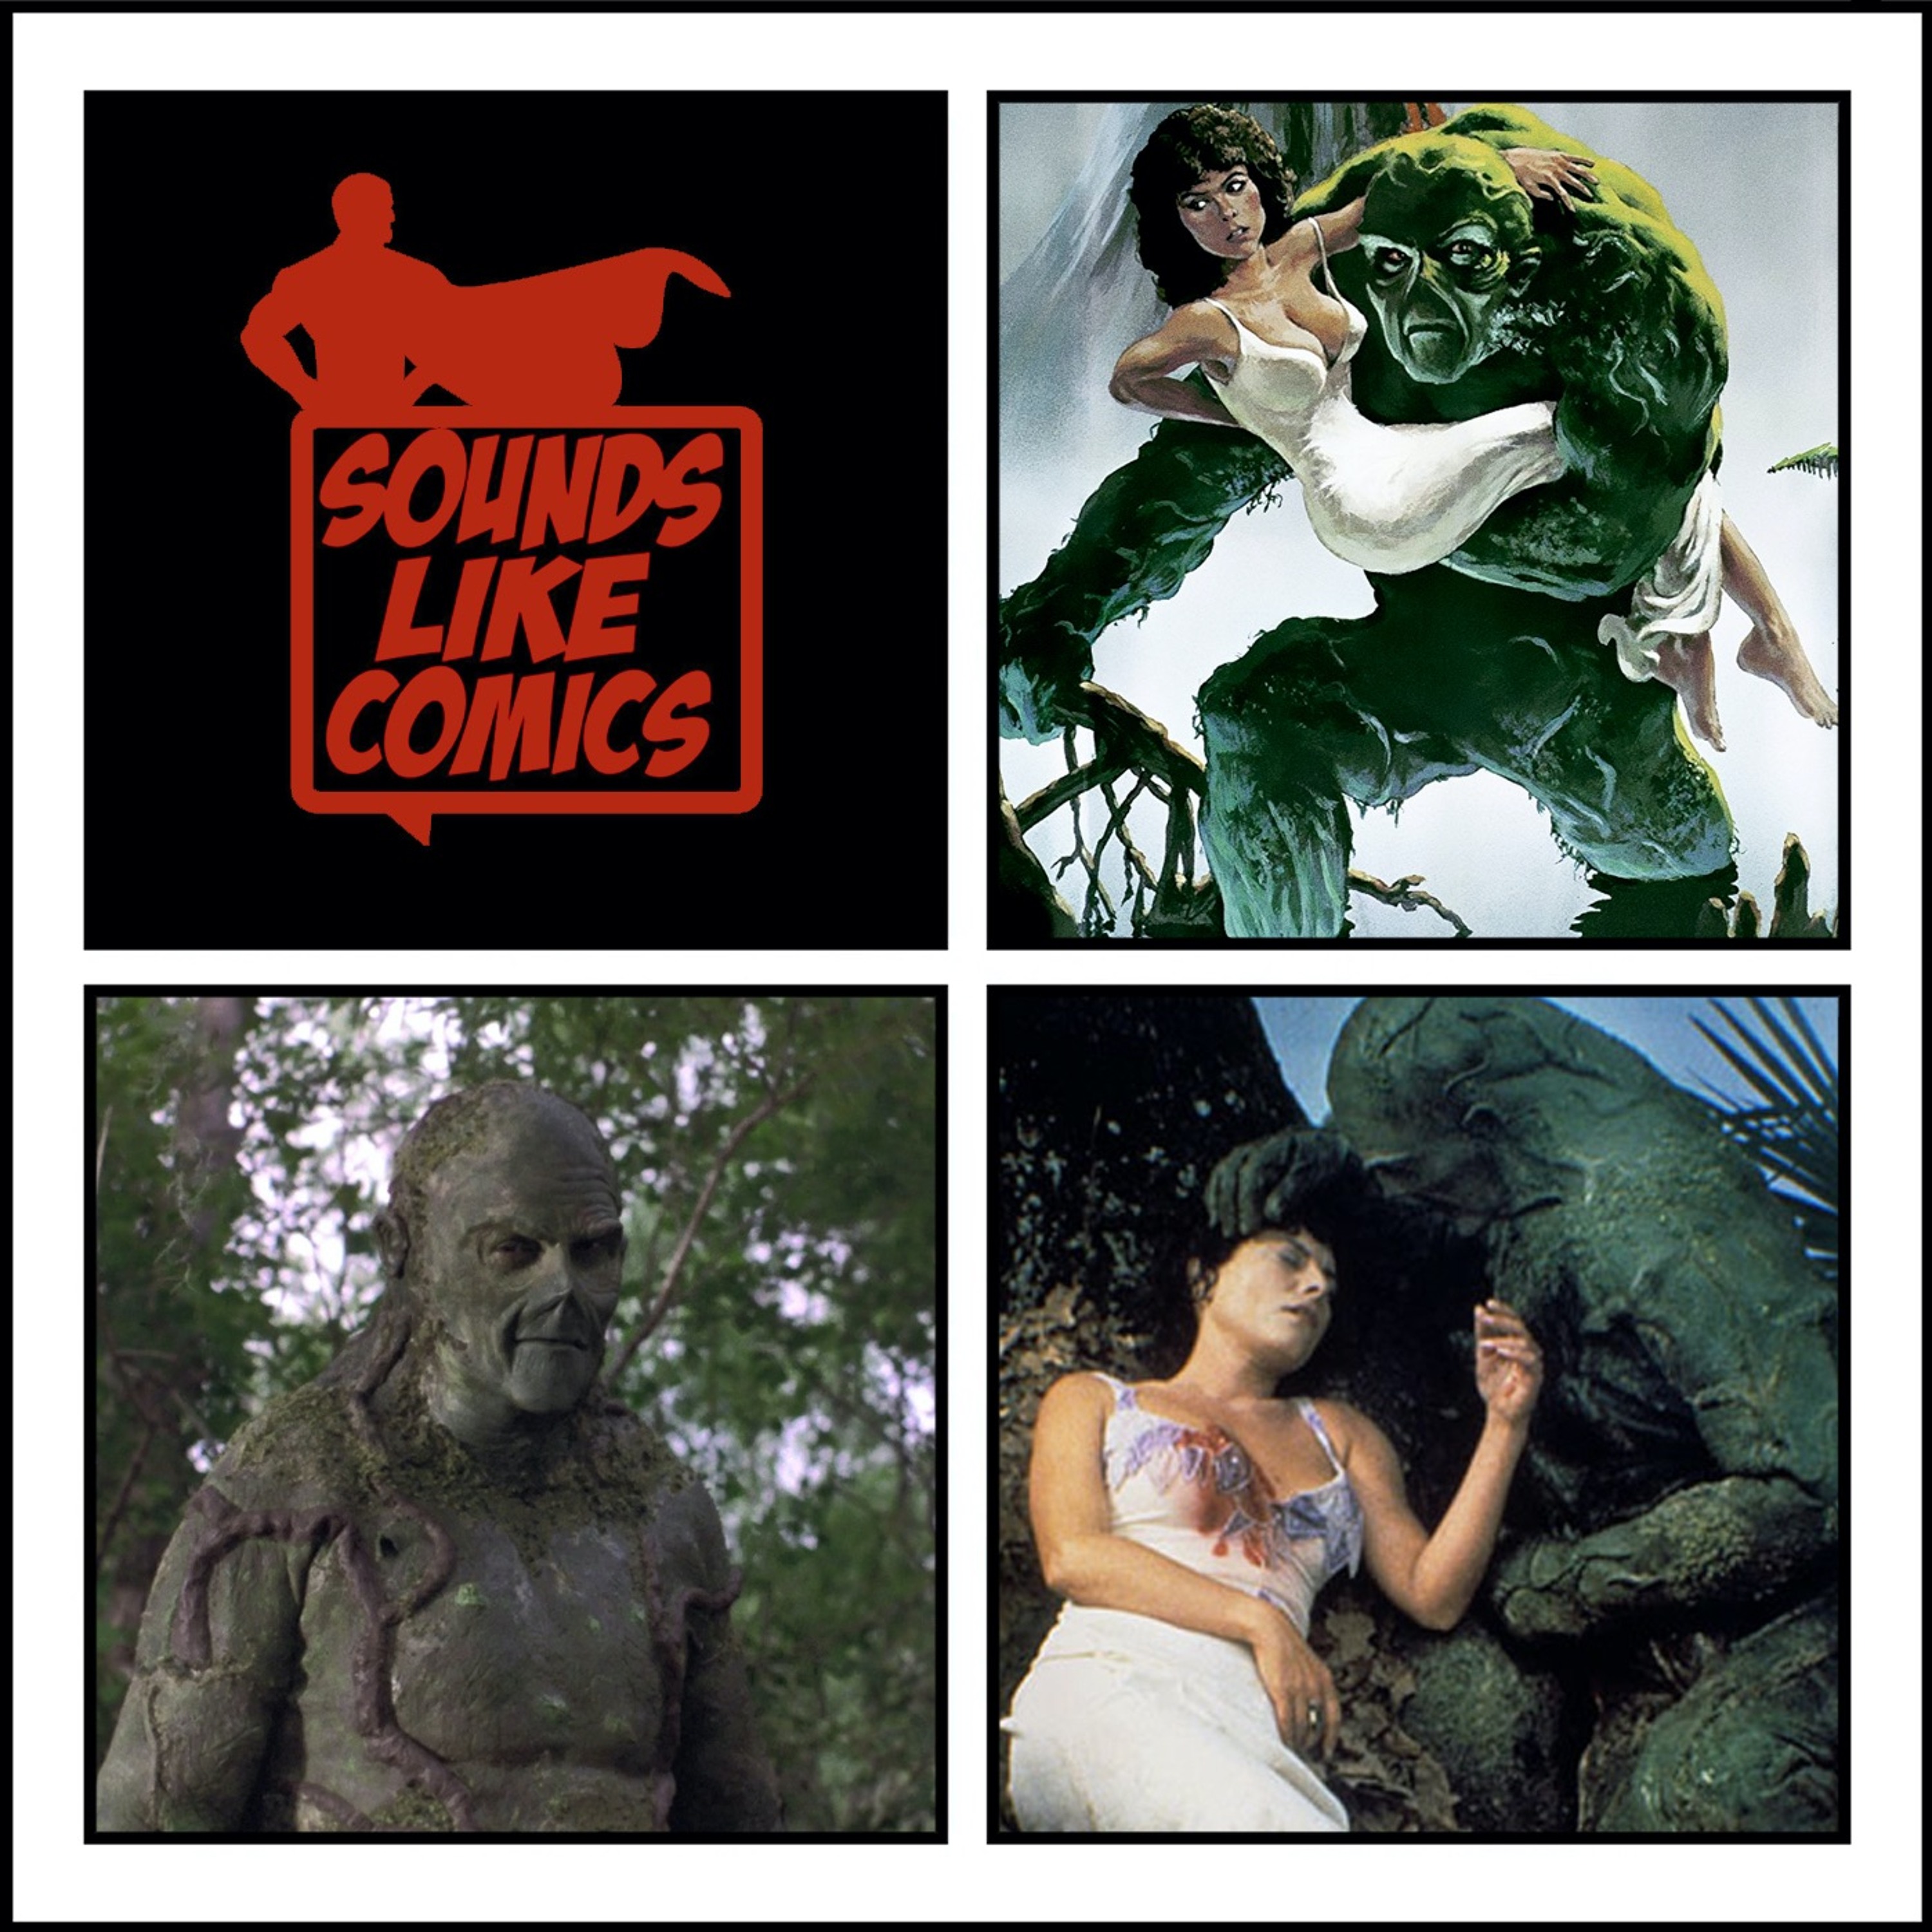 Sounds Like Comics Ep 204 - Swamp Thing (Movie 1982)